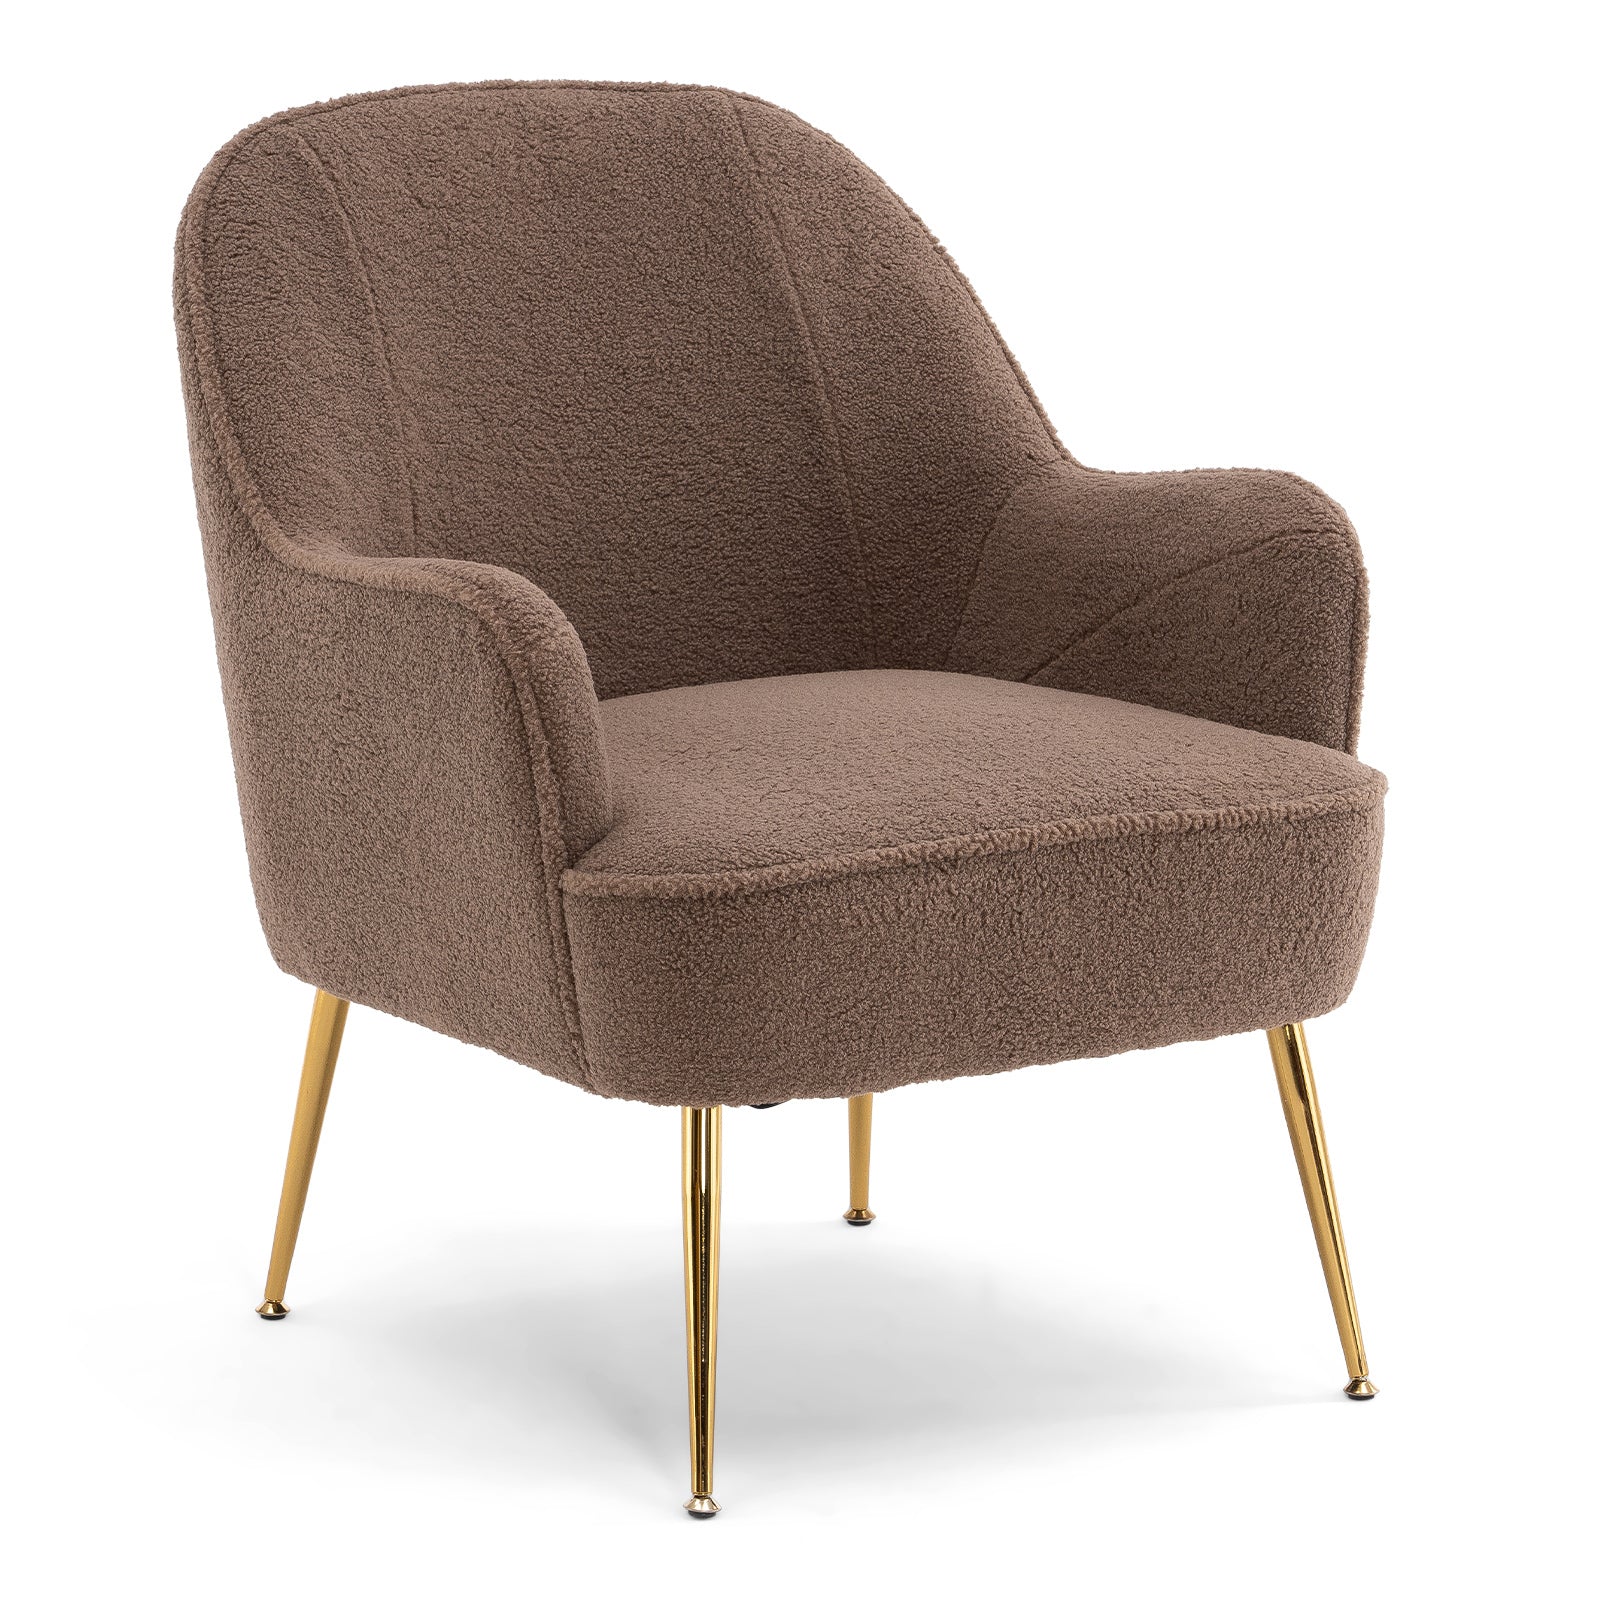 001-Modern Soft Teddy Fabric Accent Chair With Gold Metal Legs For Indoor,Coffee